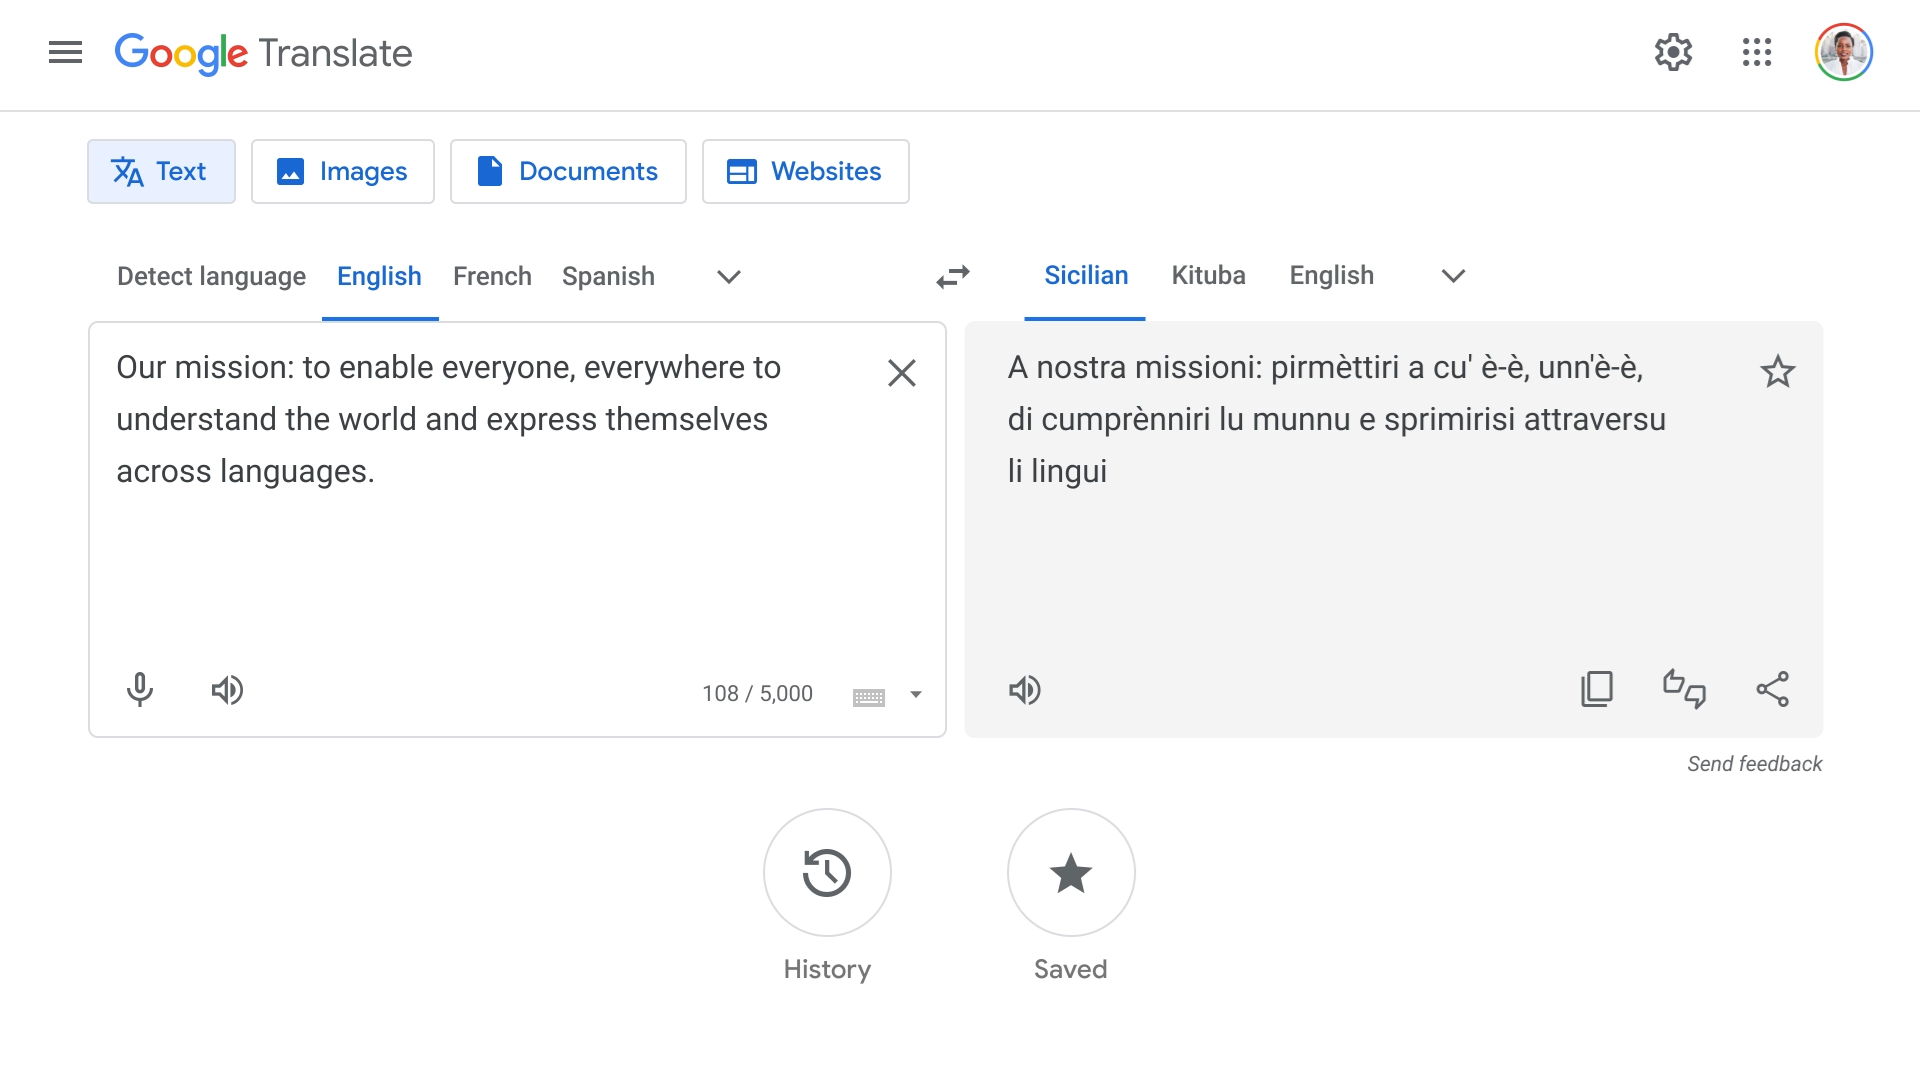 forget-duolingo-–-google-translate-just-got-a-massive-ai-upgrade-that-gives-it-over-100-new-languages